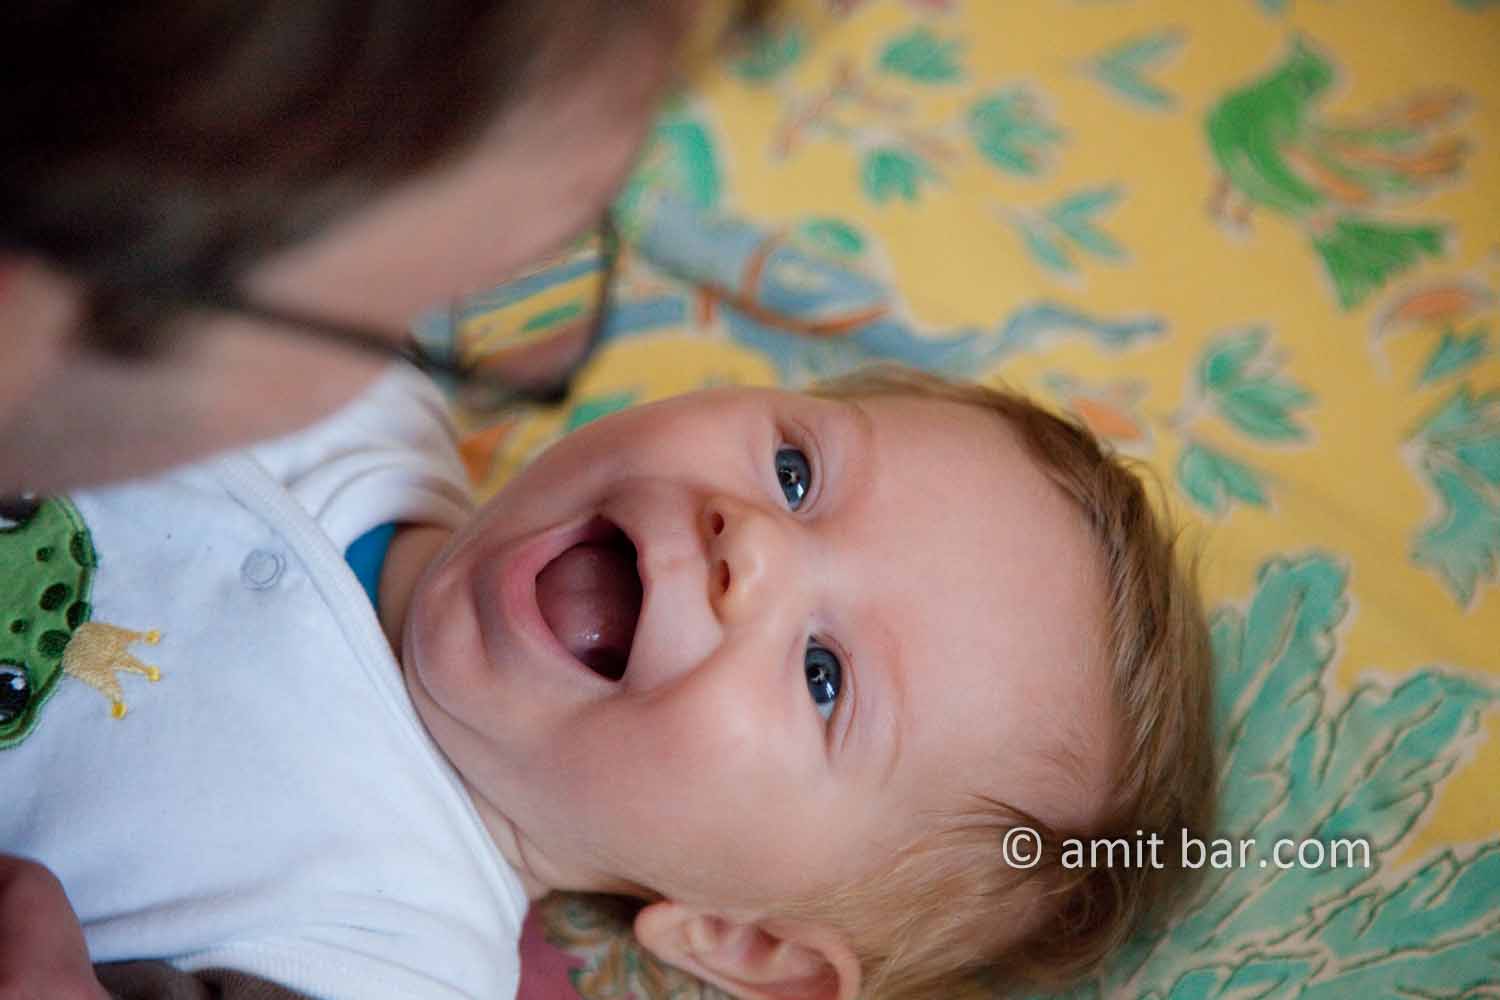 Funny Faces II: A father makes his son laughing